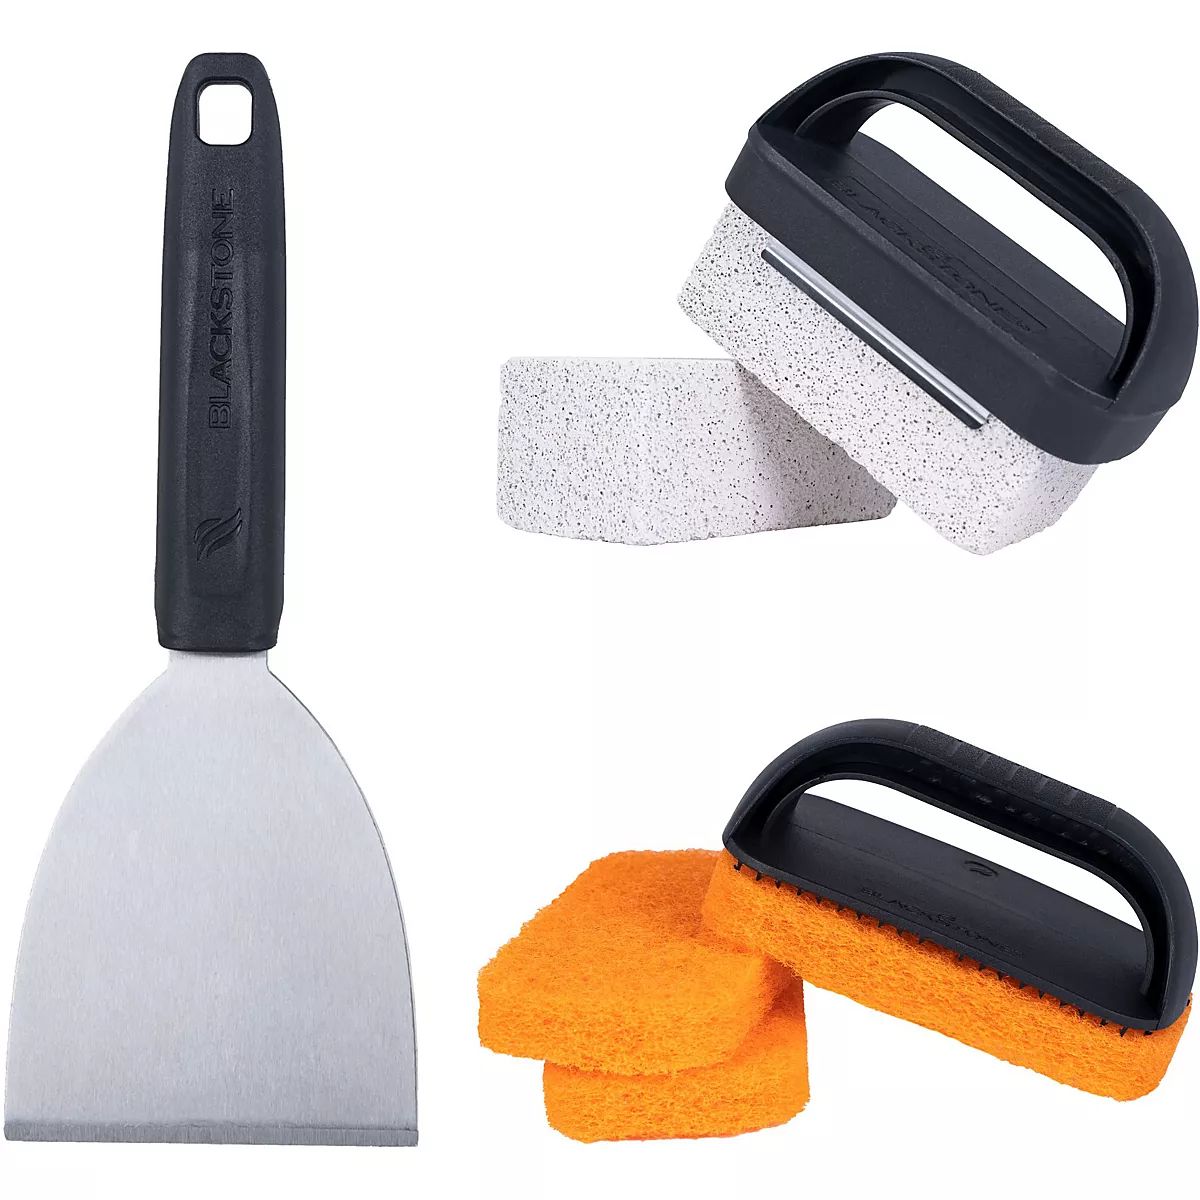 Blackstone Griddle Cleaning Kit | Academy Sports + Outdoors